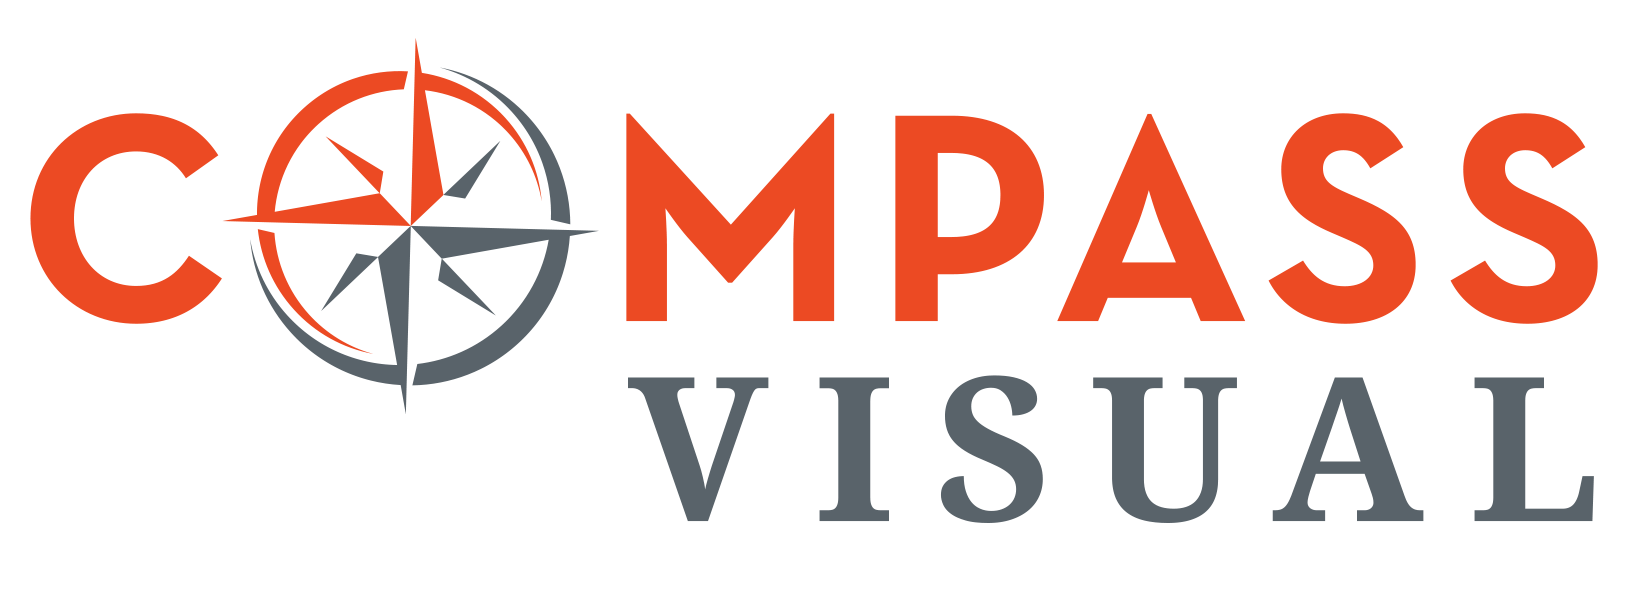 Compass Visual logo - grey and orange<br />
with compass for the O<br />
